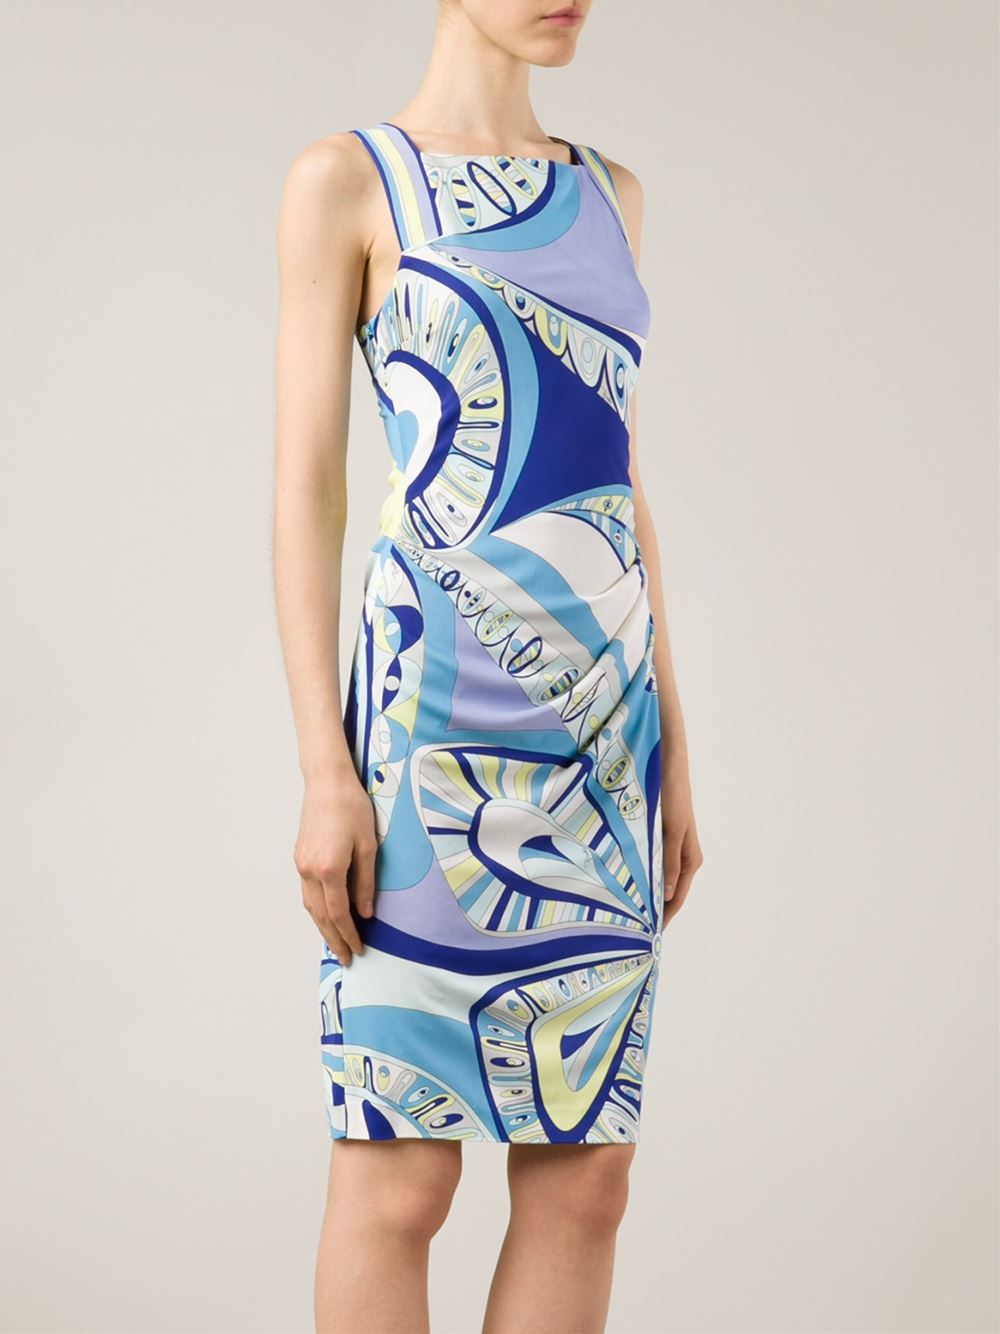 Lyst - Emilio Pucci Psychedelic Print Fitted Dress in Blue